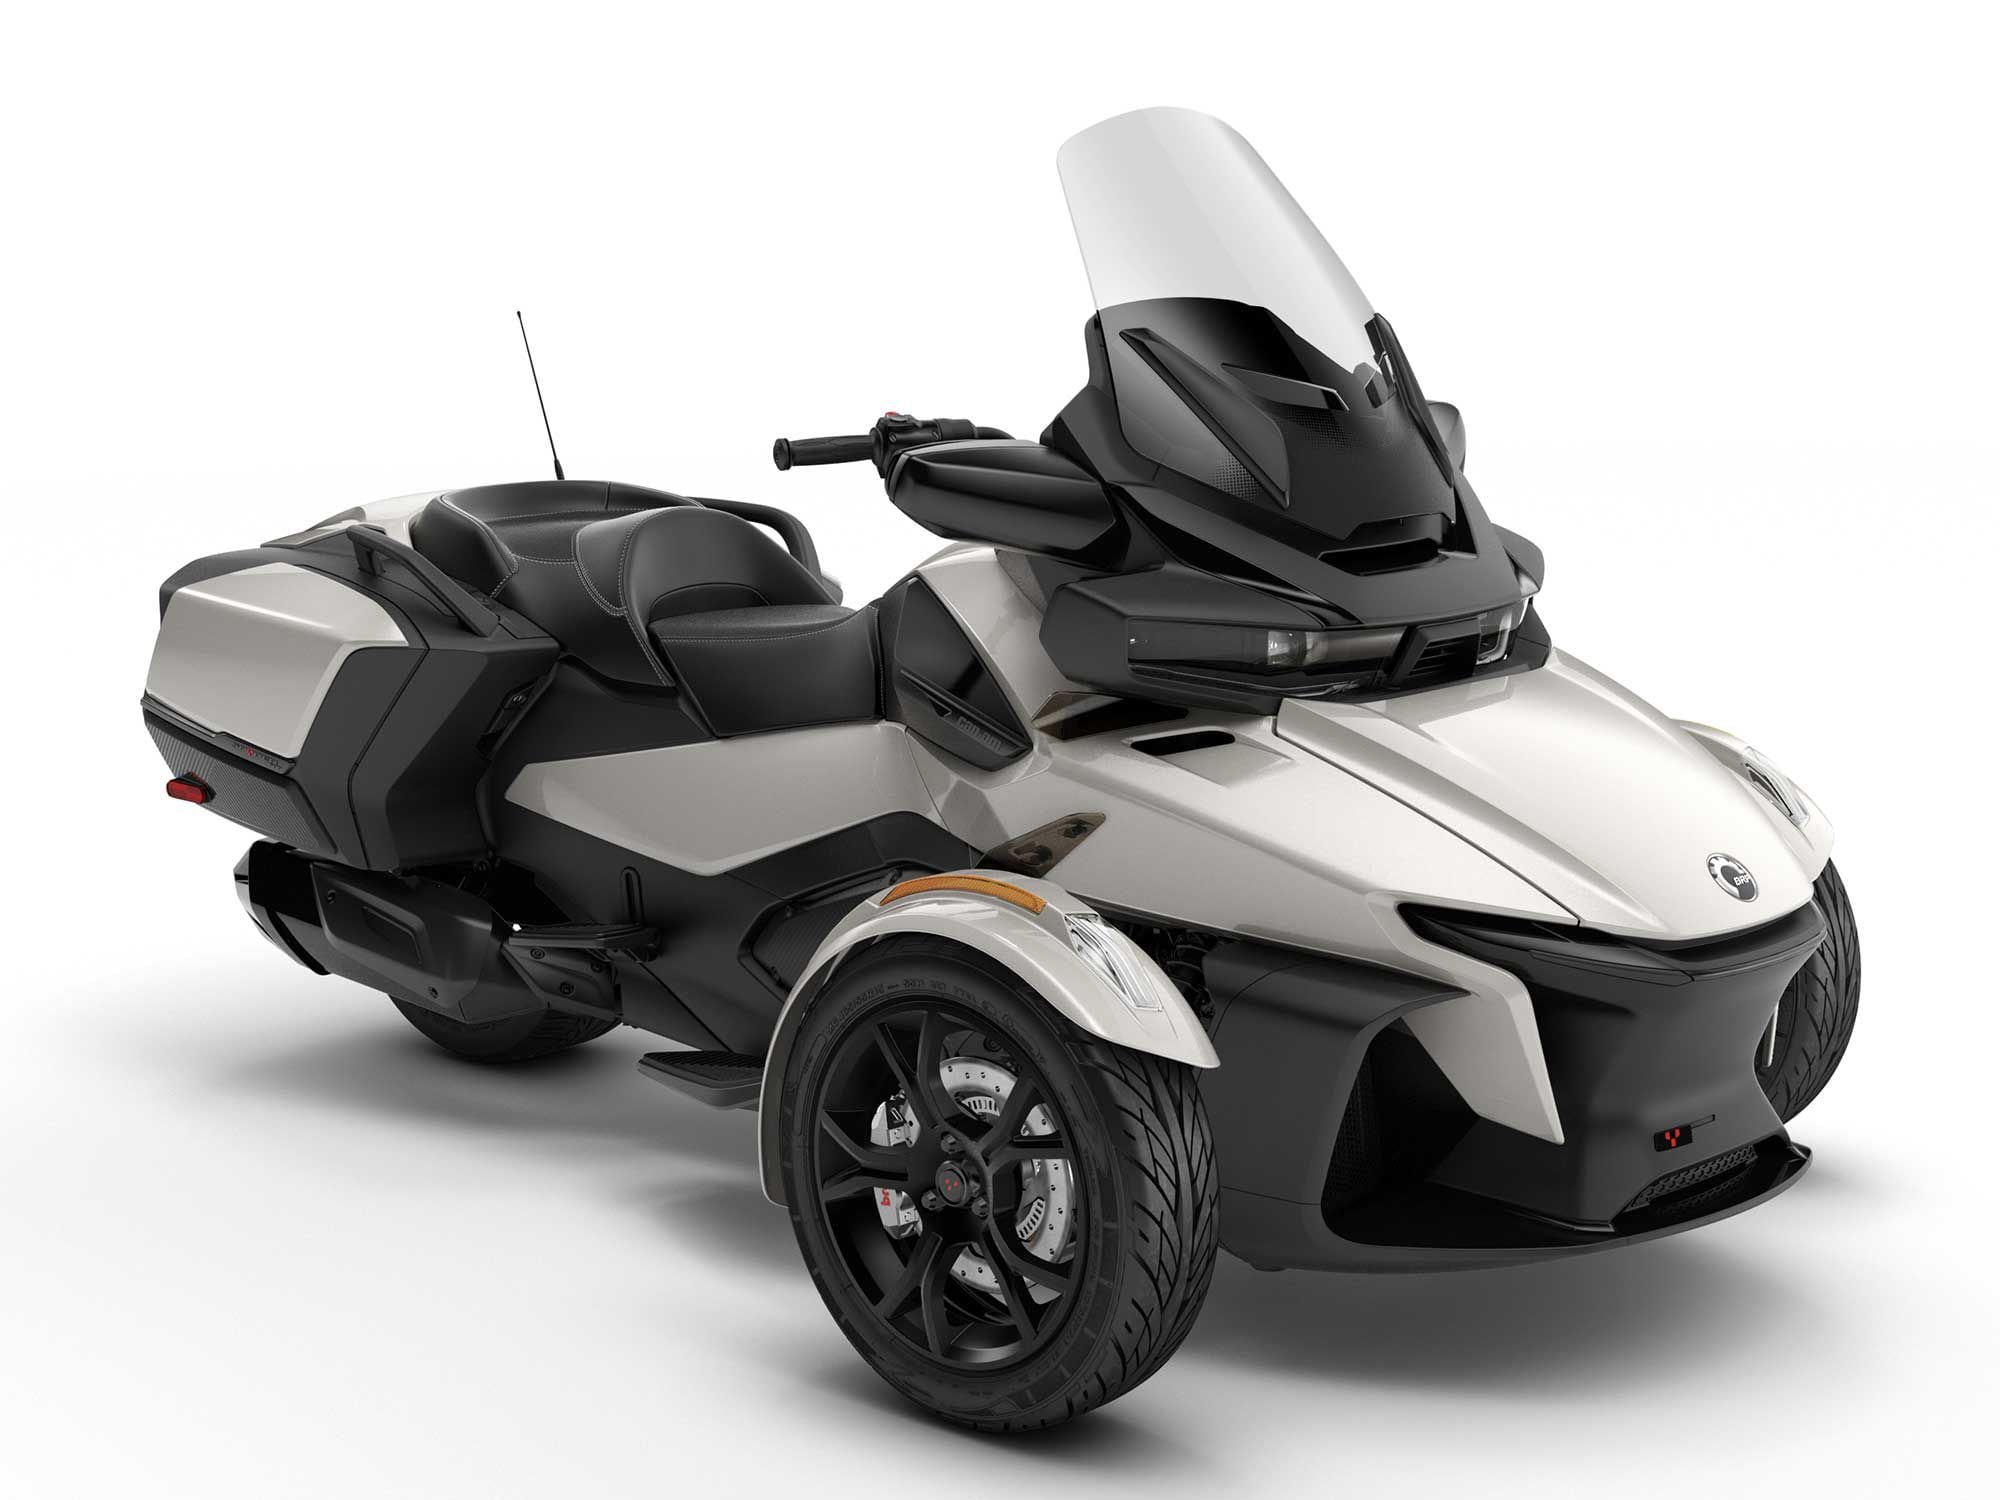 2022 Can-Am Spyder RT Limited Review